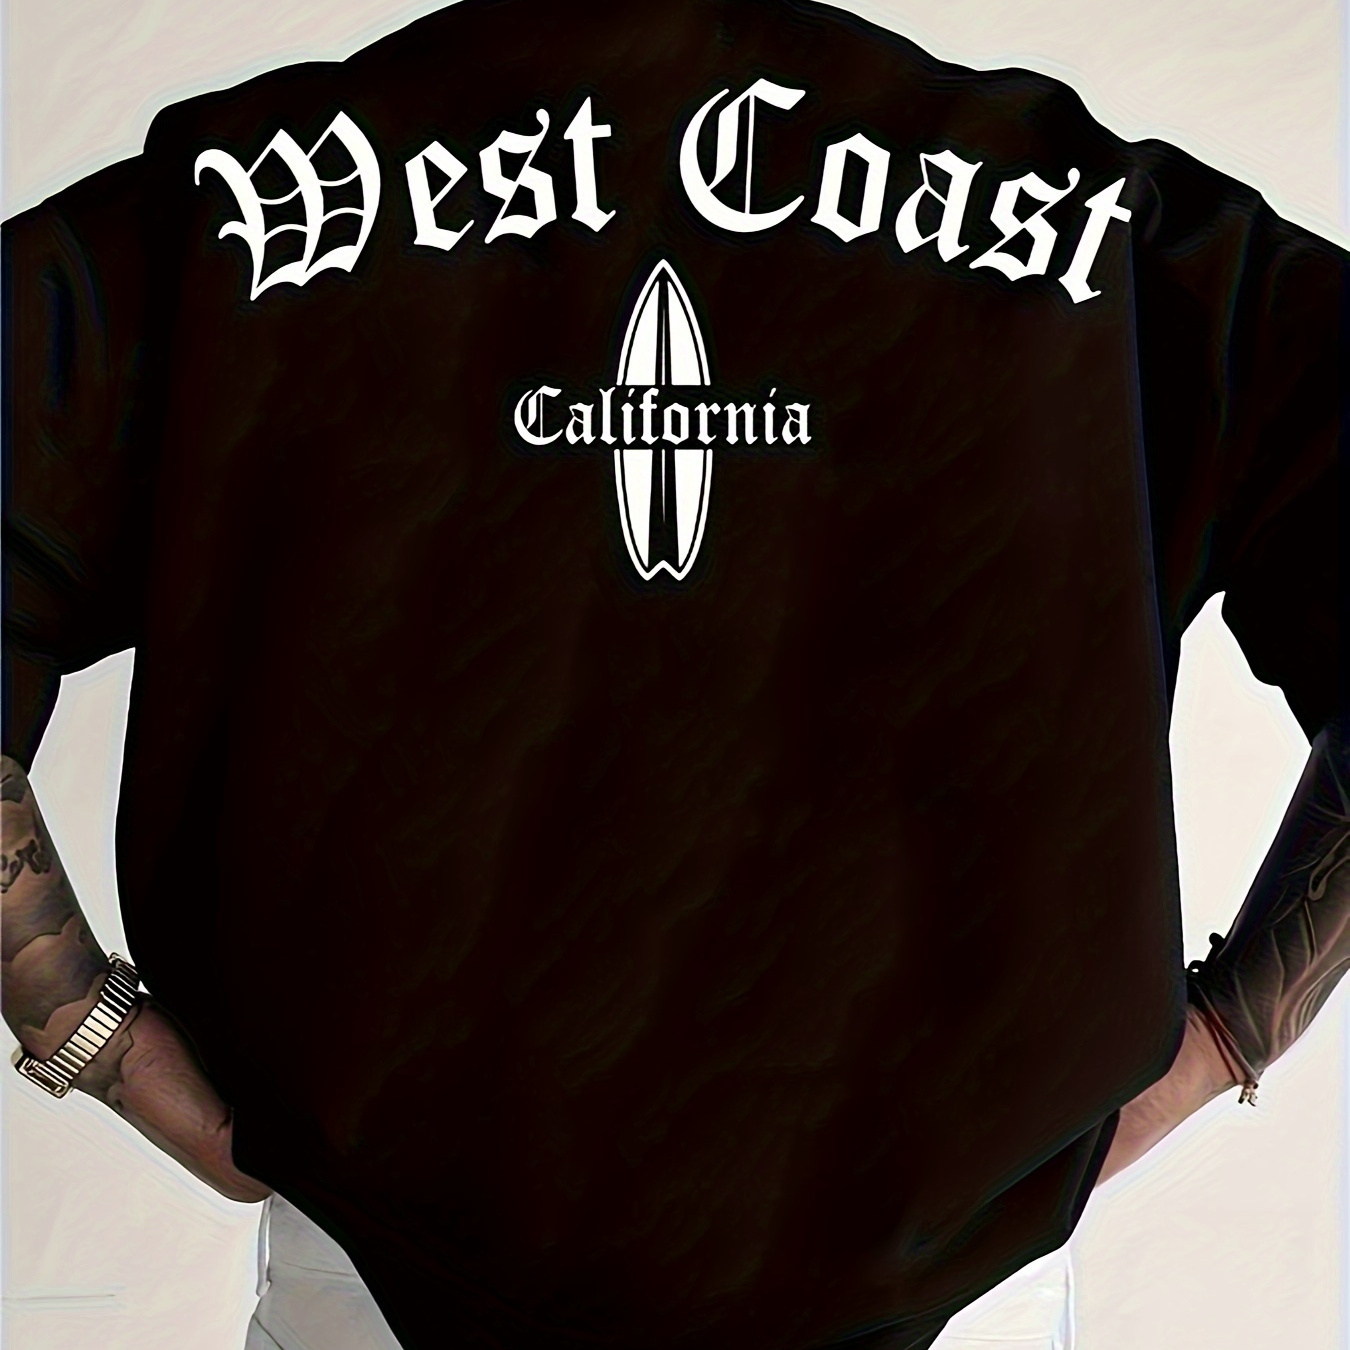 

Men's Casual Short-sleeved T-shirt, Spring And Summer " West Coast" Gothic Letter Print Top, Comfortable Round Neck Tee, Regular Fit, Versatile Fashion For Everyday Wear